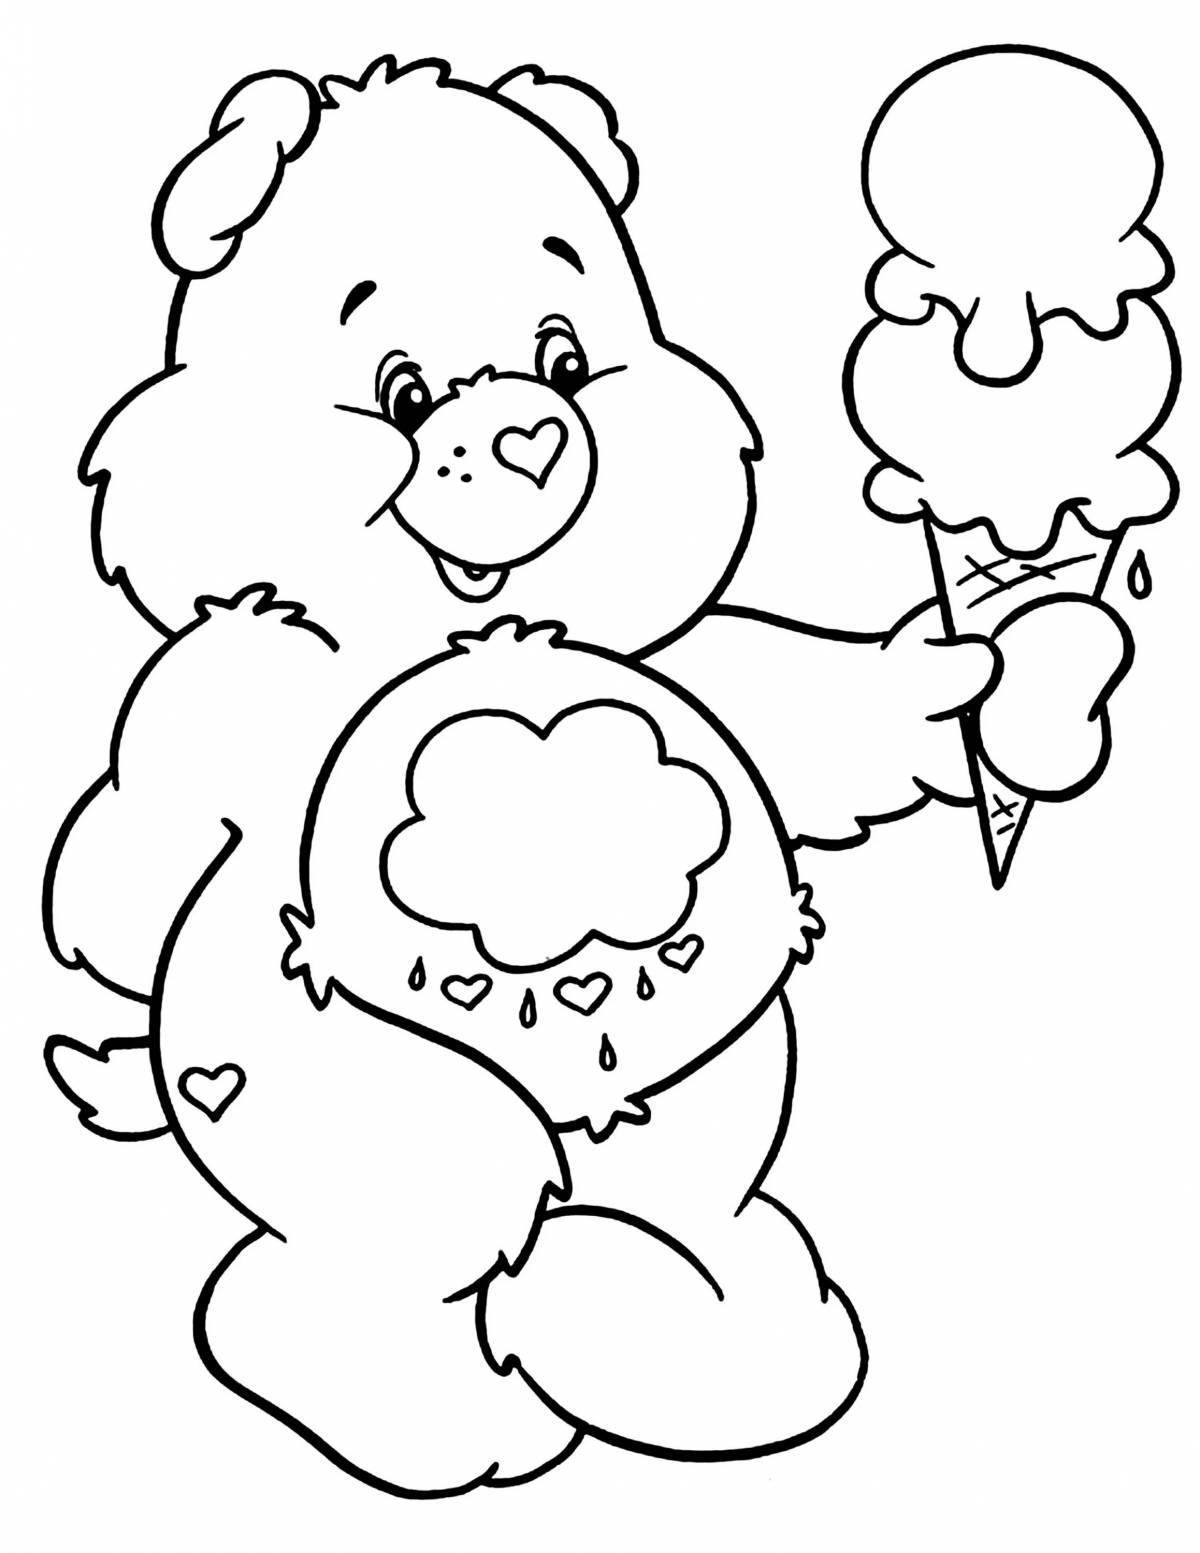 Coloring page adorable bear and rabbit